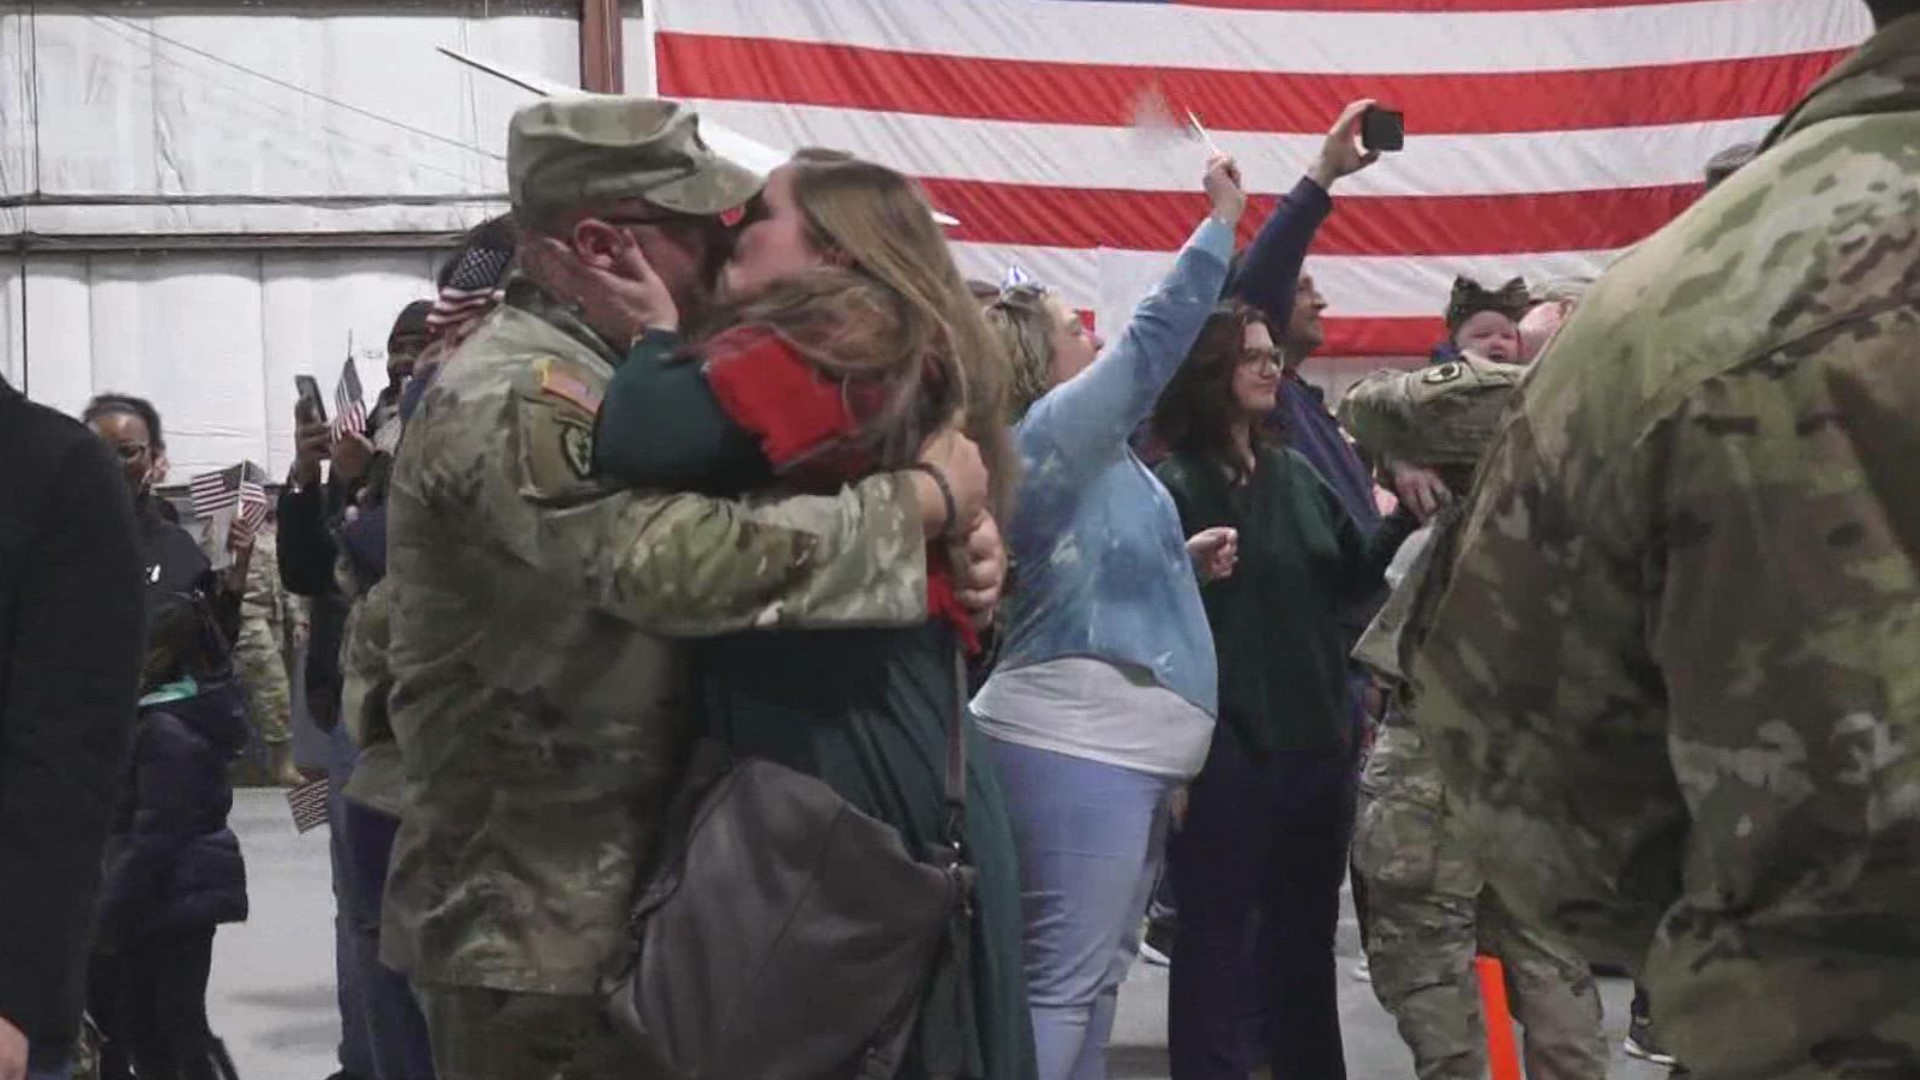 After 9 months away on the other side of the world, South Carolina Nation Guard troops are finally home, just in time for the holidays.